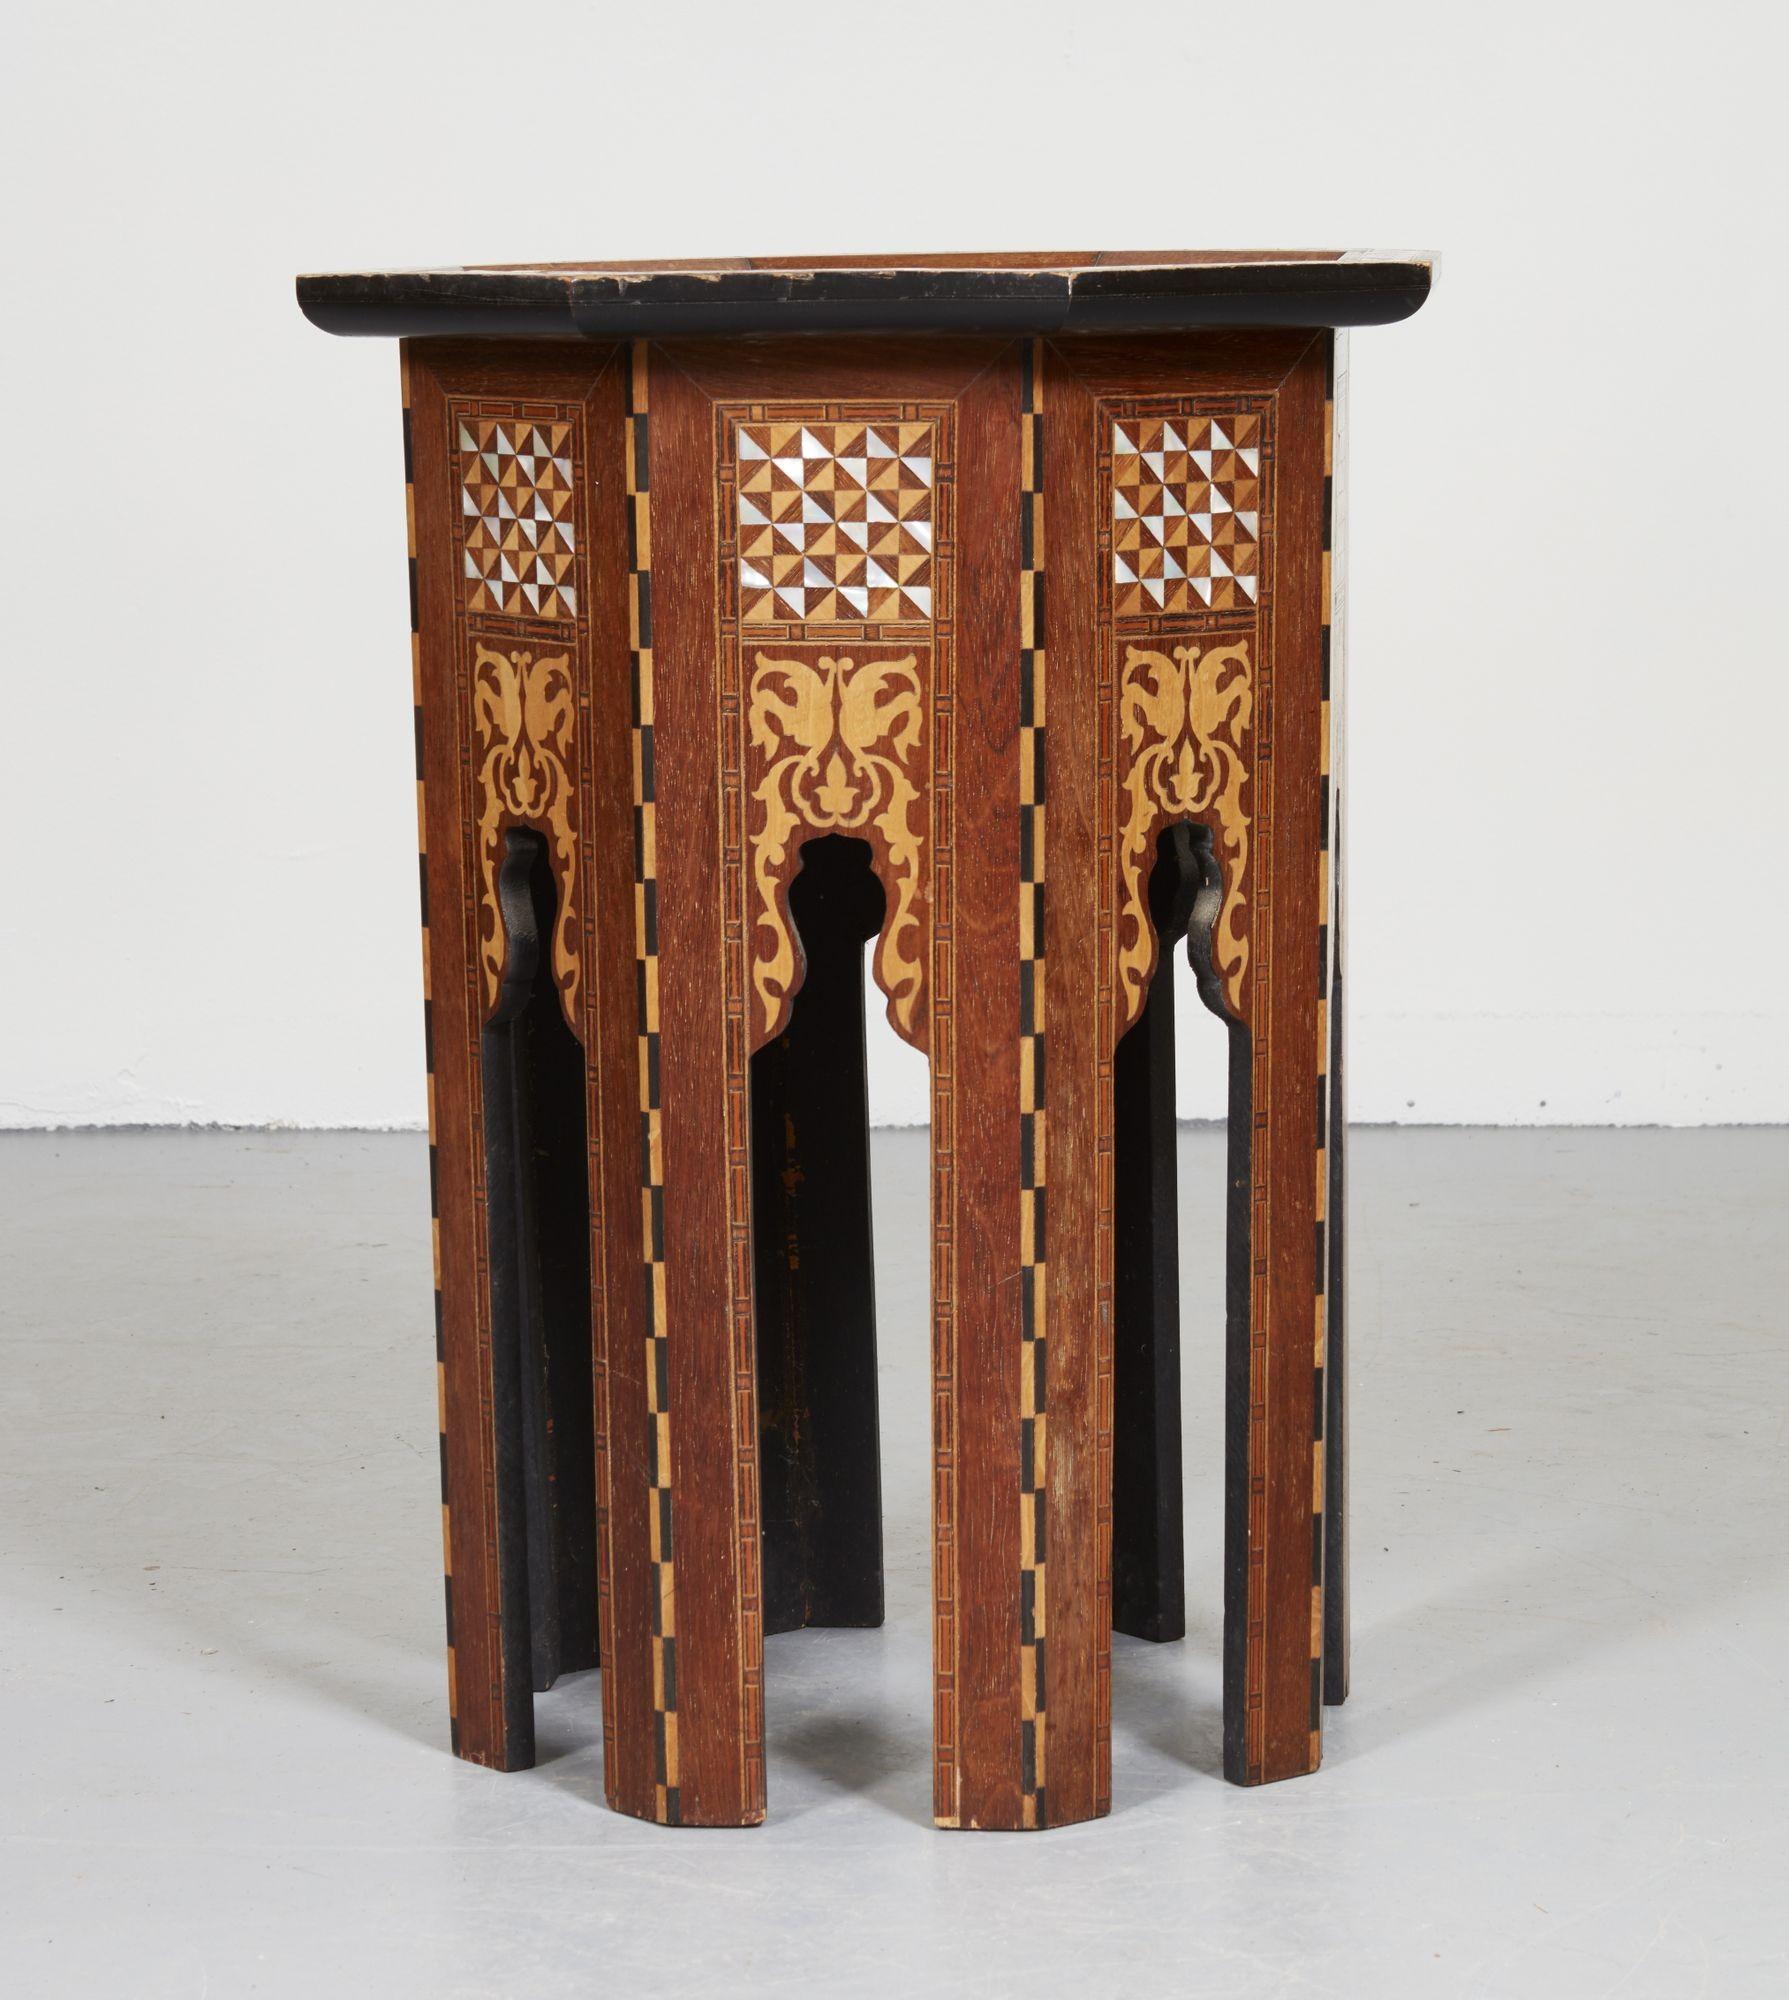 A drinks table in the Moorish style with an octagonal top and faceted octagonal base with arched colonnaded legs having intricate marquetry, inlay and mother of pearl geometric decoration. In the manner of Libertys of London.